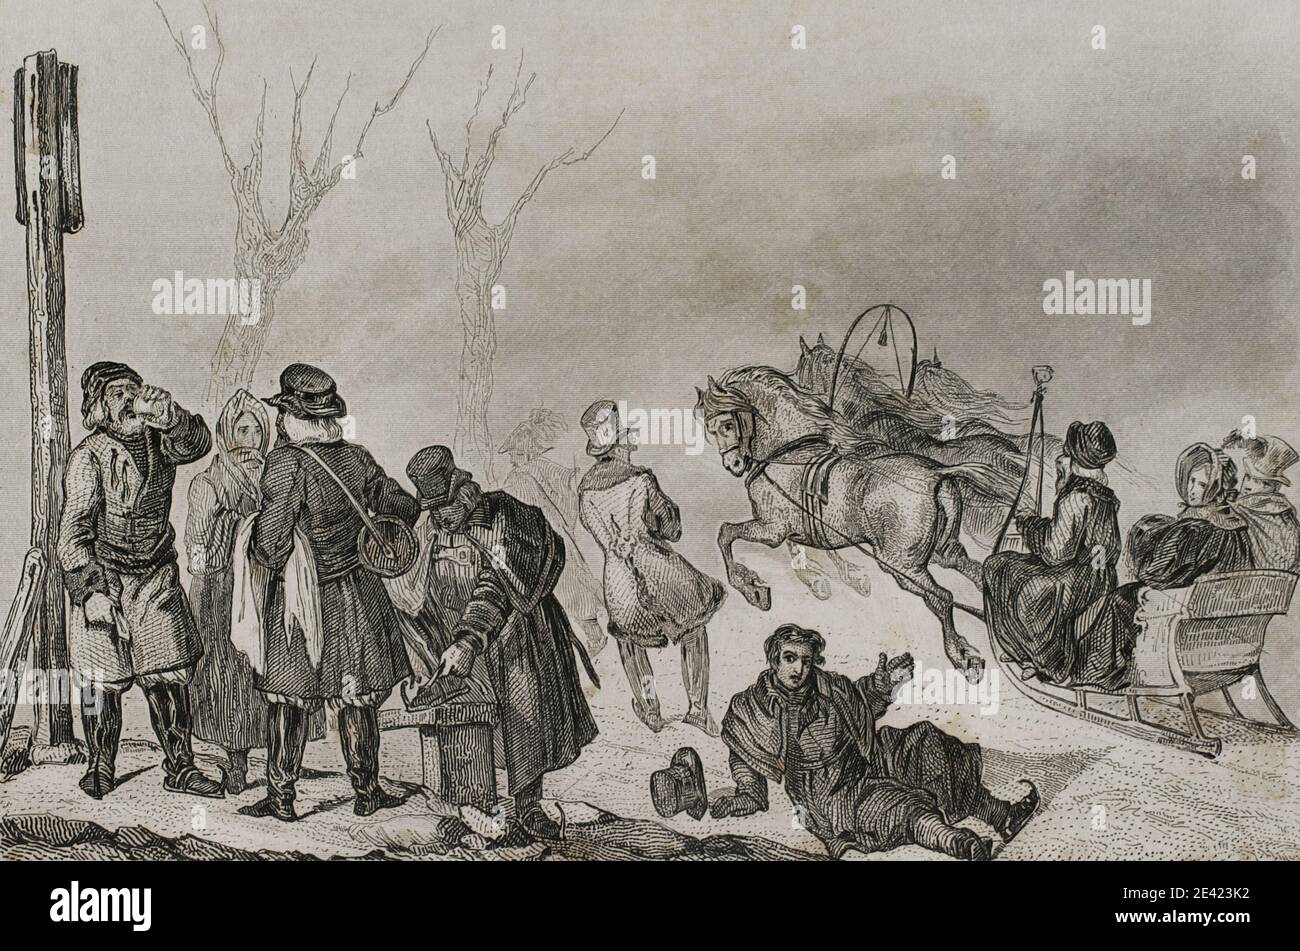 Russia. People on skates and on a horse drawn sleigh. Engraving by Lemaitre, Vernier and Chaillot. History of Russia by Jean Marie Chopin (1796-1870). Panorama Universal, Spanish edition, 1839. Stock Photo